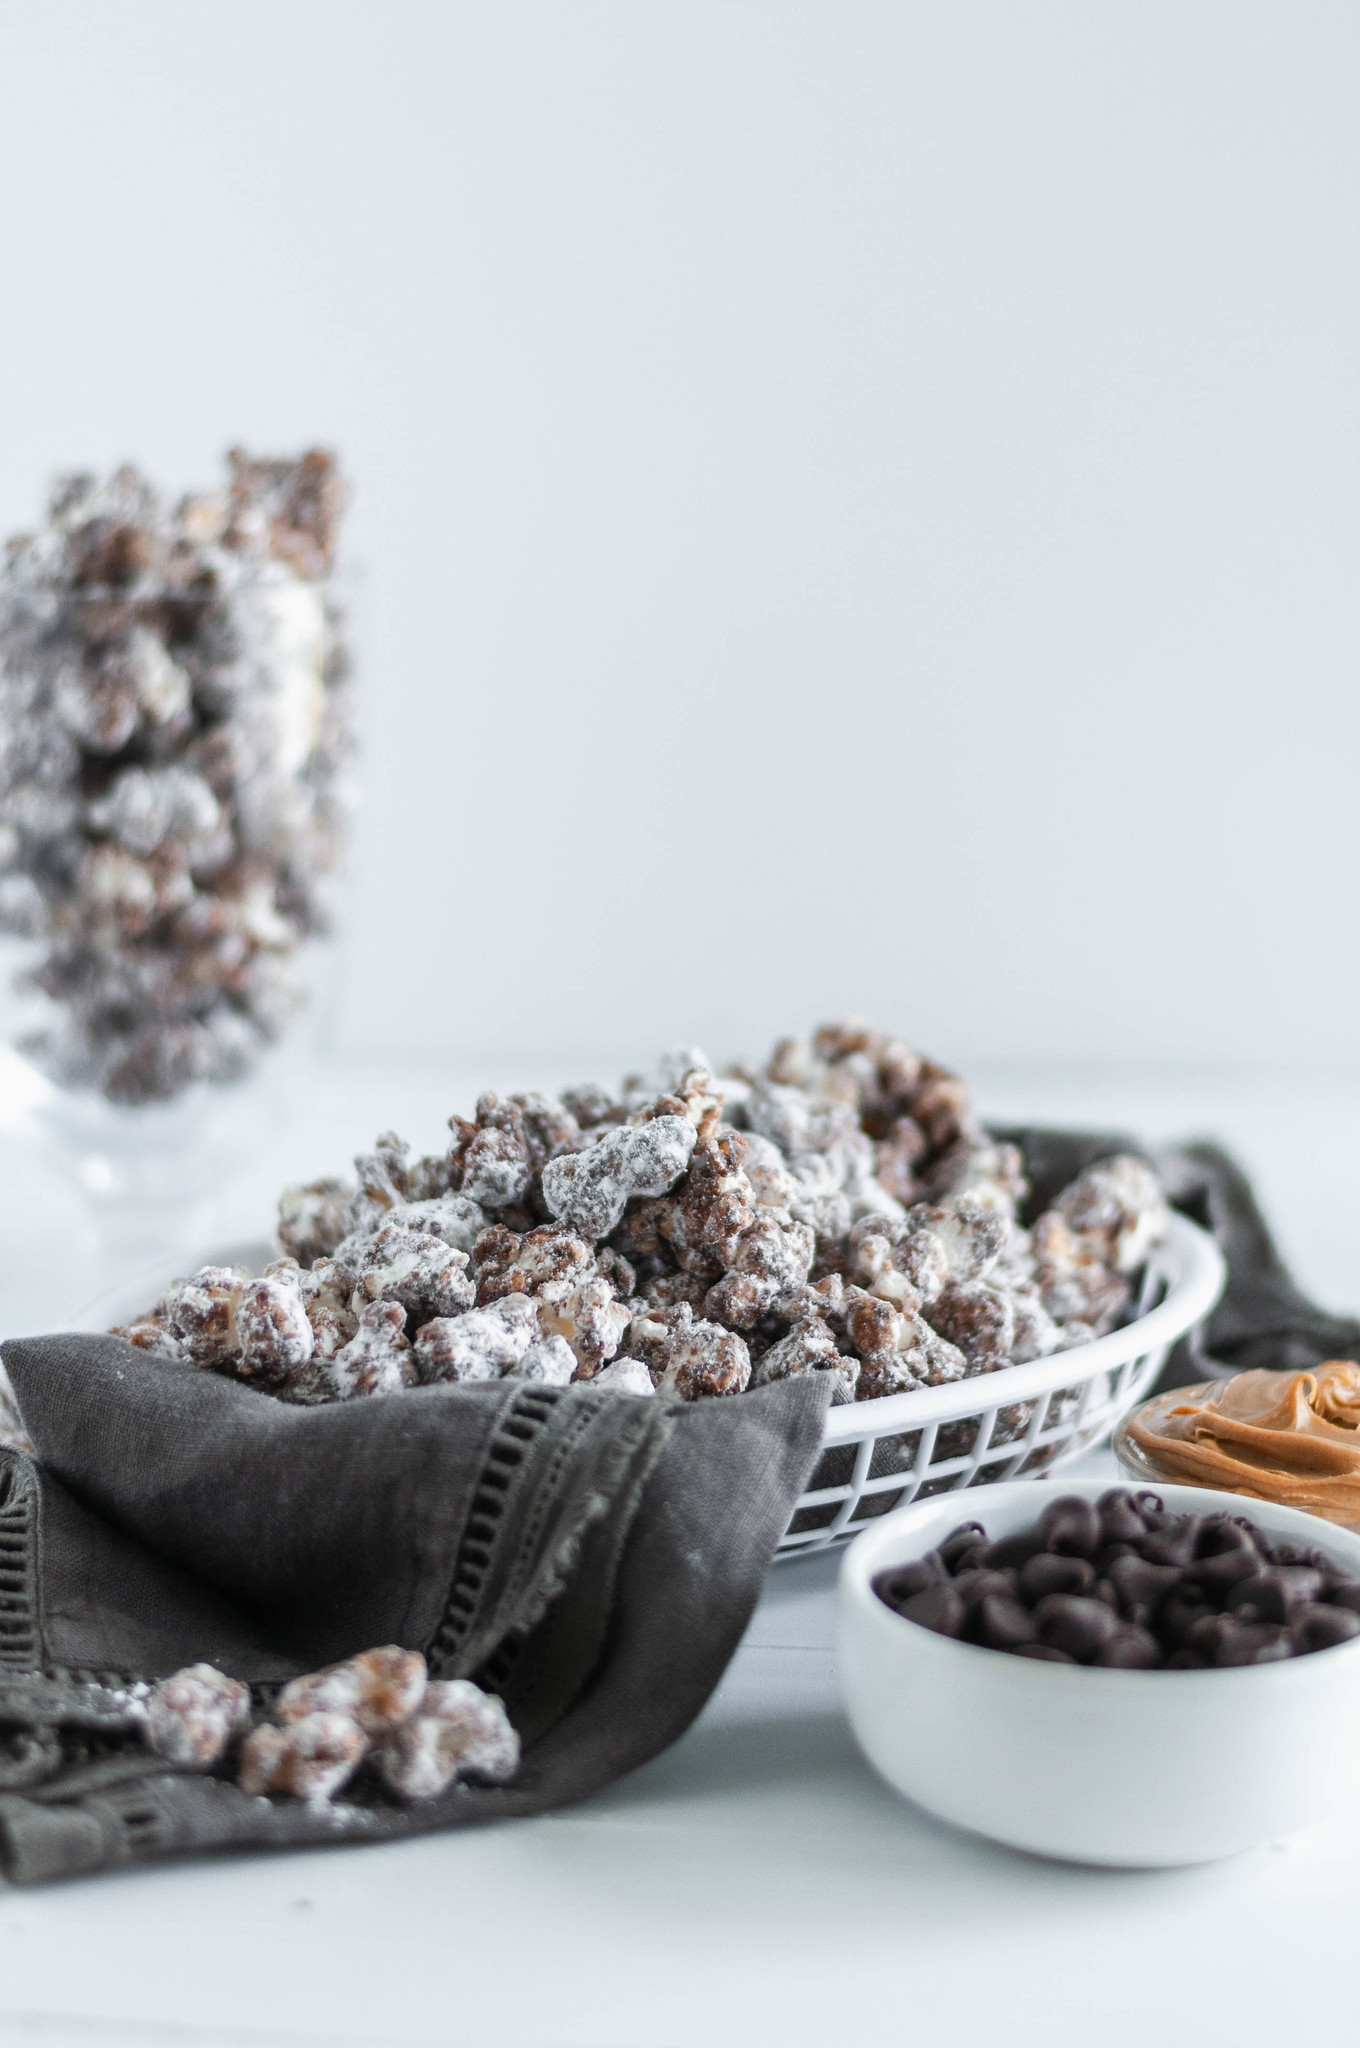 Update your game day snacking with this Puppy Chow Popcorn. Peanut butter and chocolate coated popcorn tossed in powdered sugar. Addiction ahead.